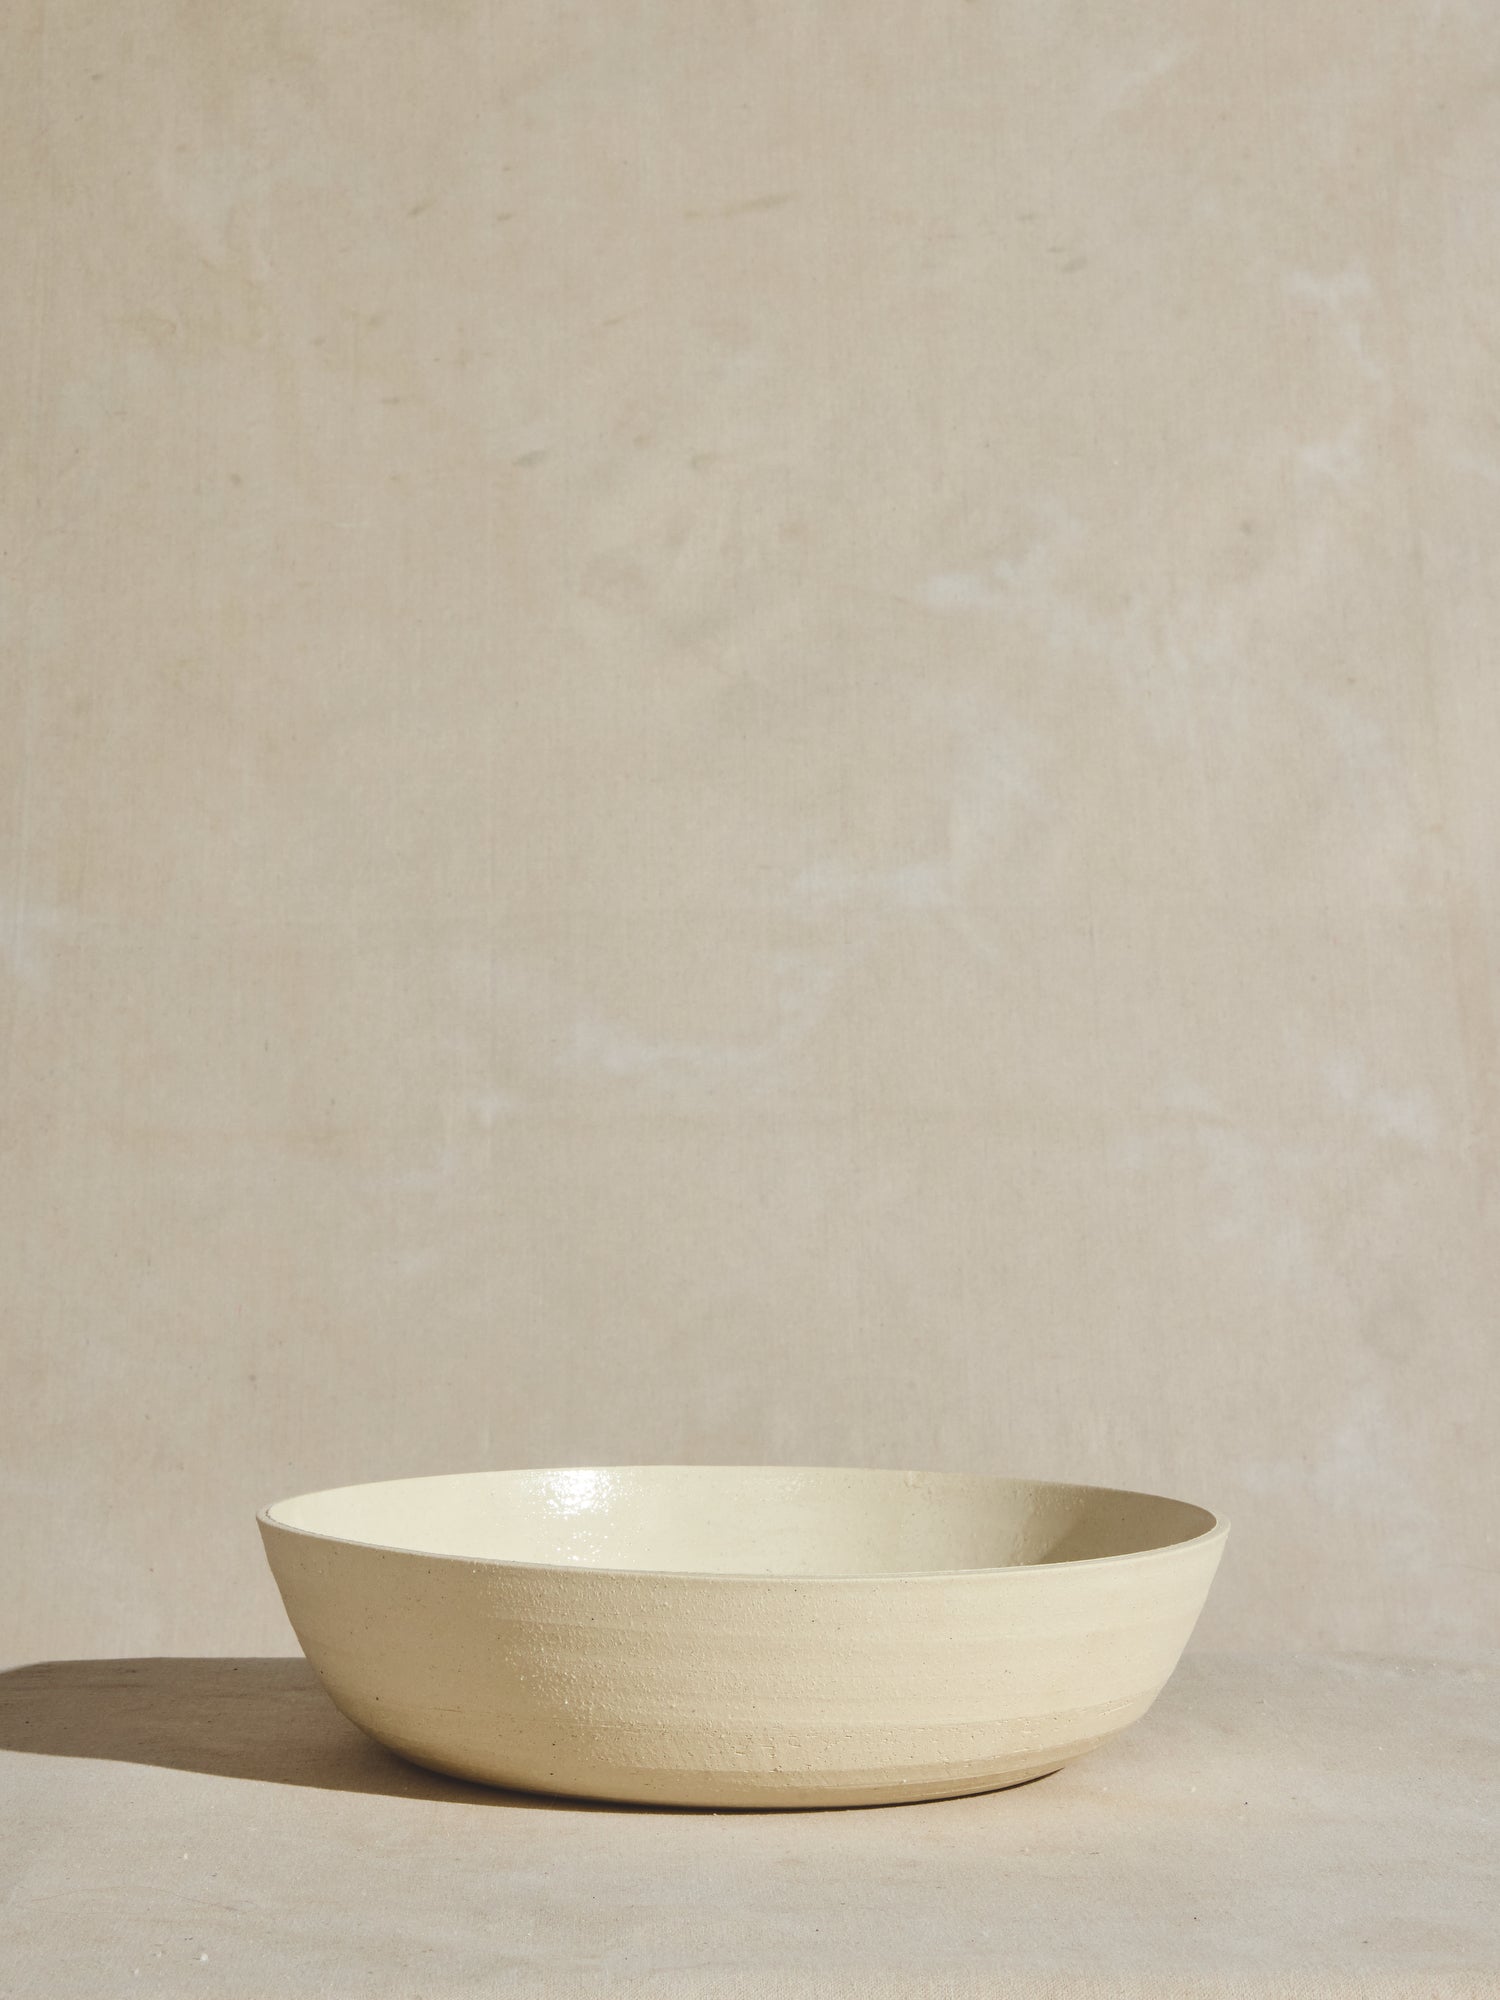 Hand thrown ceramic serving salad bowl stacked in natural finish.